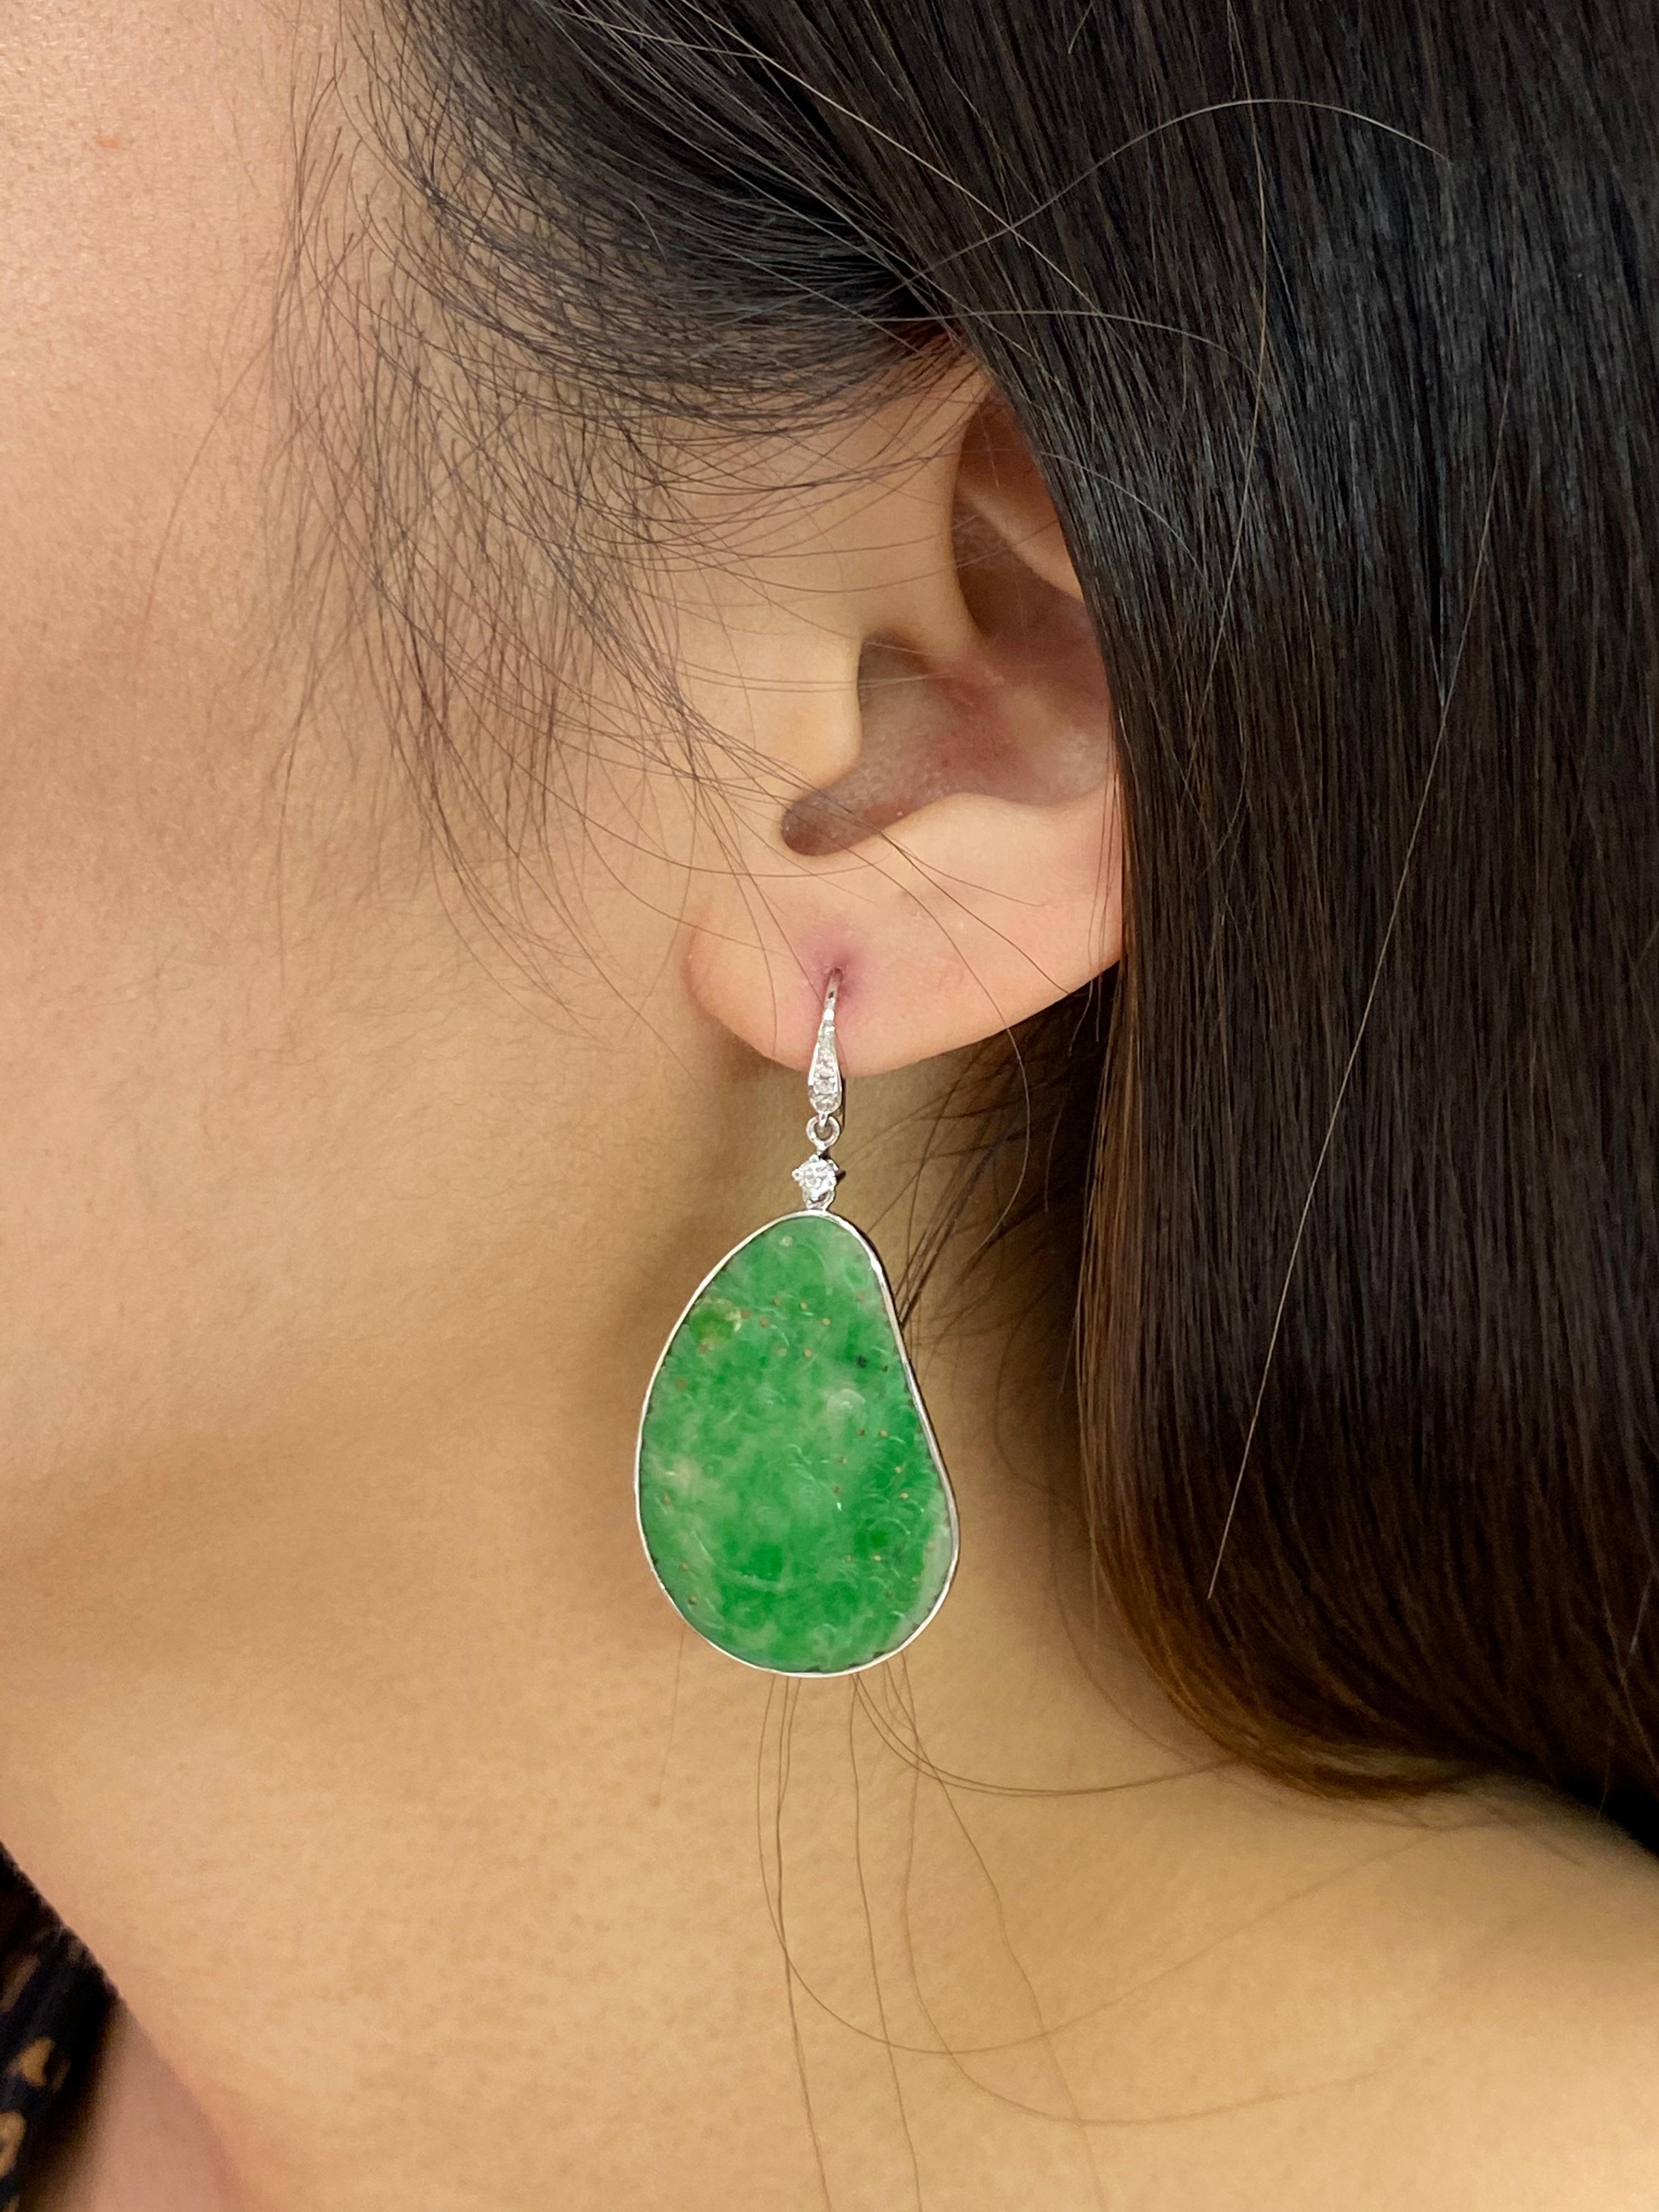 Vintage design using old materials. Here is a nice pair of Jade and diamond earrings. Both earrings are set in 18k white gold and diamonds. There are estimated 0.20 cts of diamonds in this setting. There are 8 diamonds in total, 6 of them total 0.8